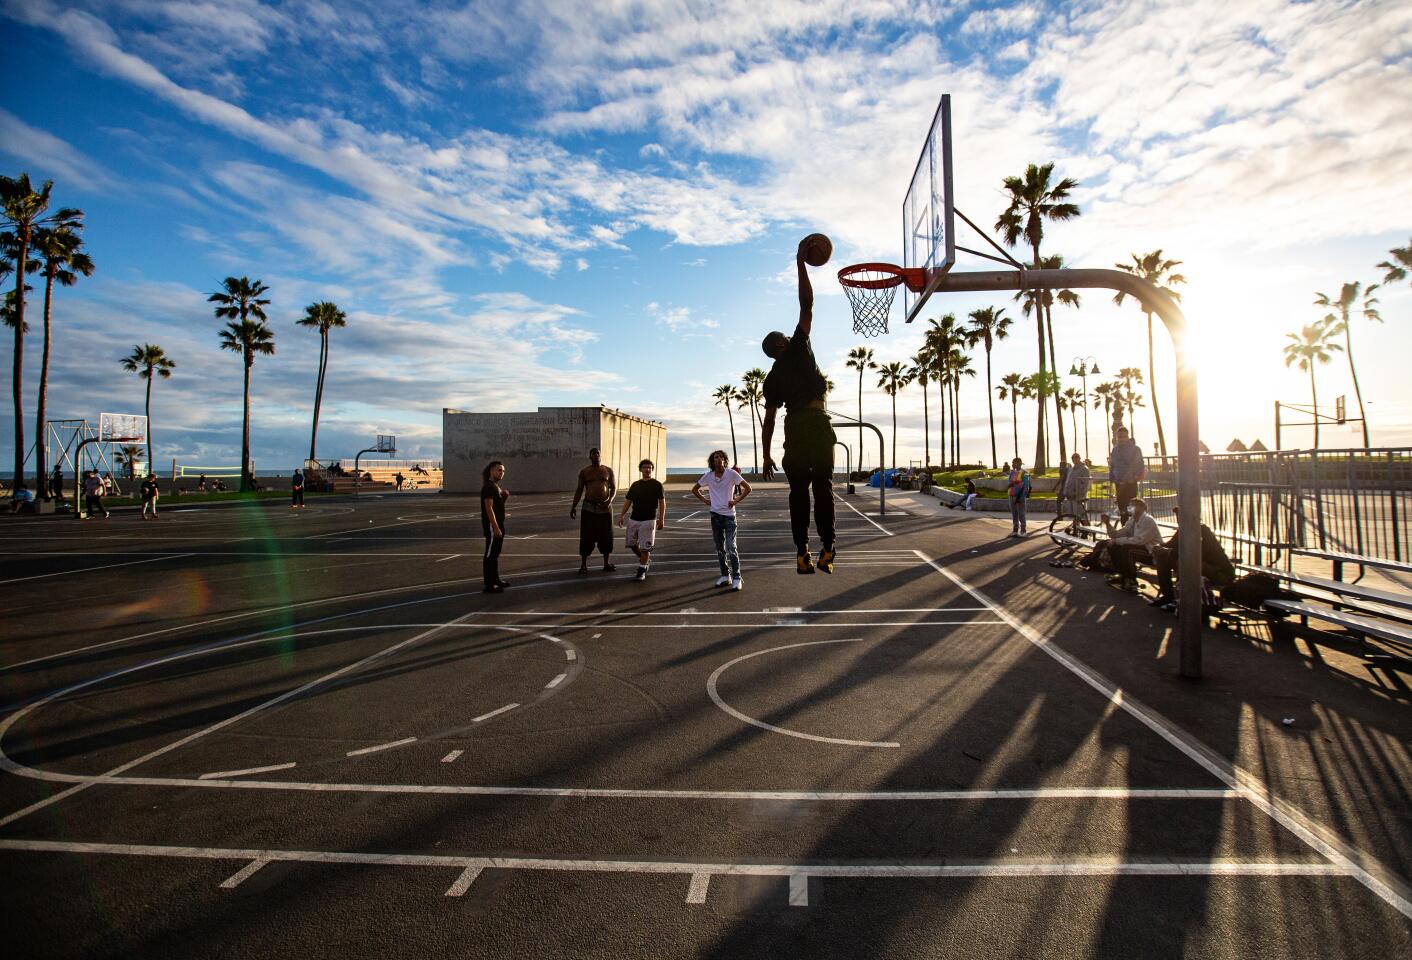 After playing a game of basketball, a group of guys watches as one of their friends dunks at Venice beach on Thursday.